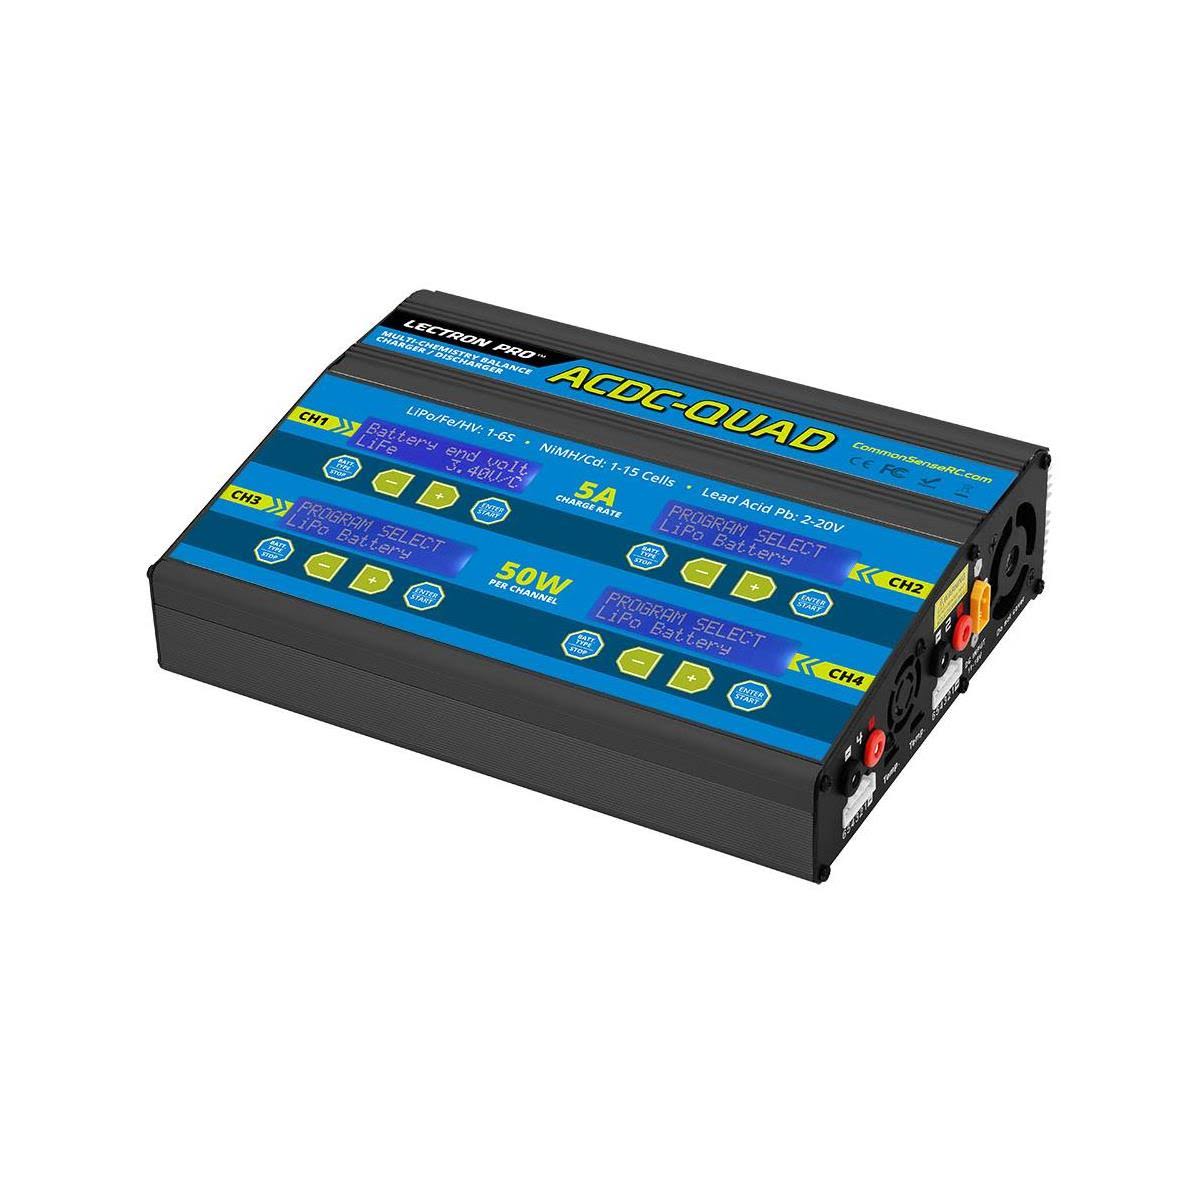 ACDC-Quad - Four-port Multi-Chemistry Balancing Charger (LiPo/Life/LiH